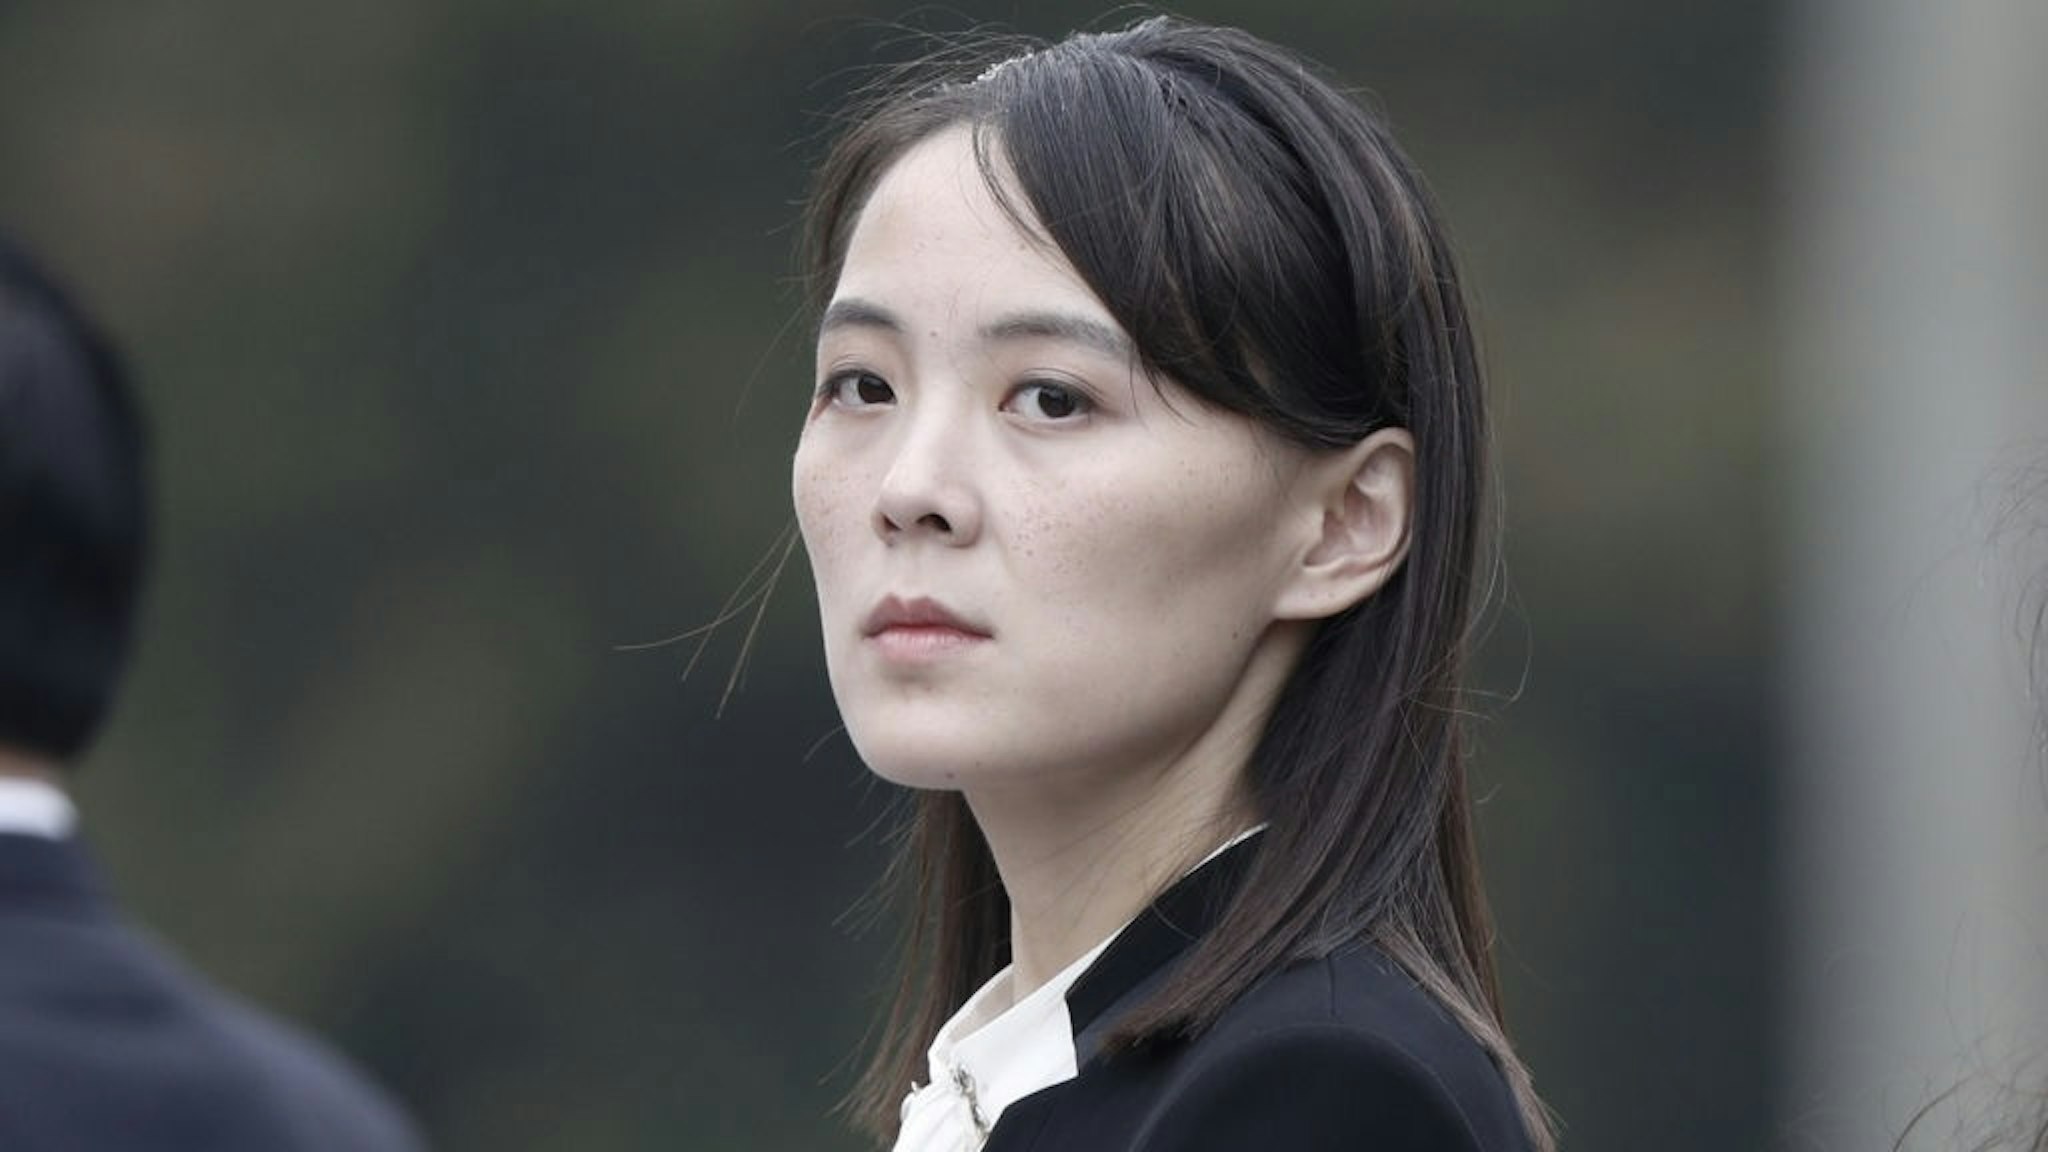 Kim Yo Jong, sister of North Korean leader Kim Jong Un, attends a wreath laying ceremony at the Ho Chi Minh Mausoleum in Hanoi, Vietnam, on Saturday, March 2, 2019. North Korean Leader Kim Jong Un will have a long train ride home through China to think about what went wrong in his second summit with Donald Trump and how to keep it from reversing his gains of the past year. Photographer: Jorge Silva/Pool via Bloomberg